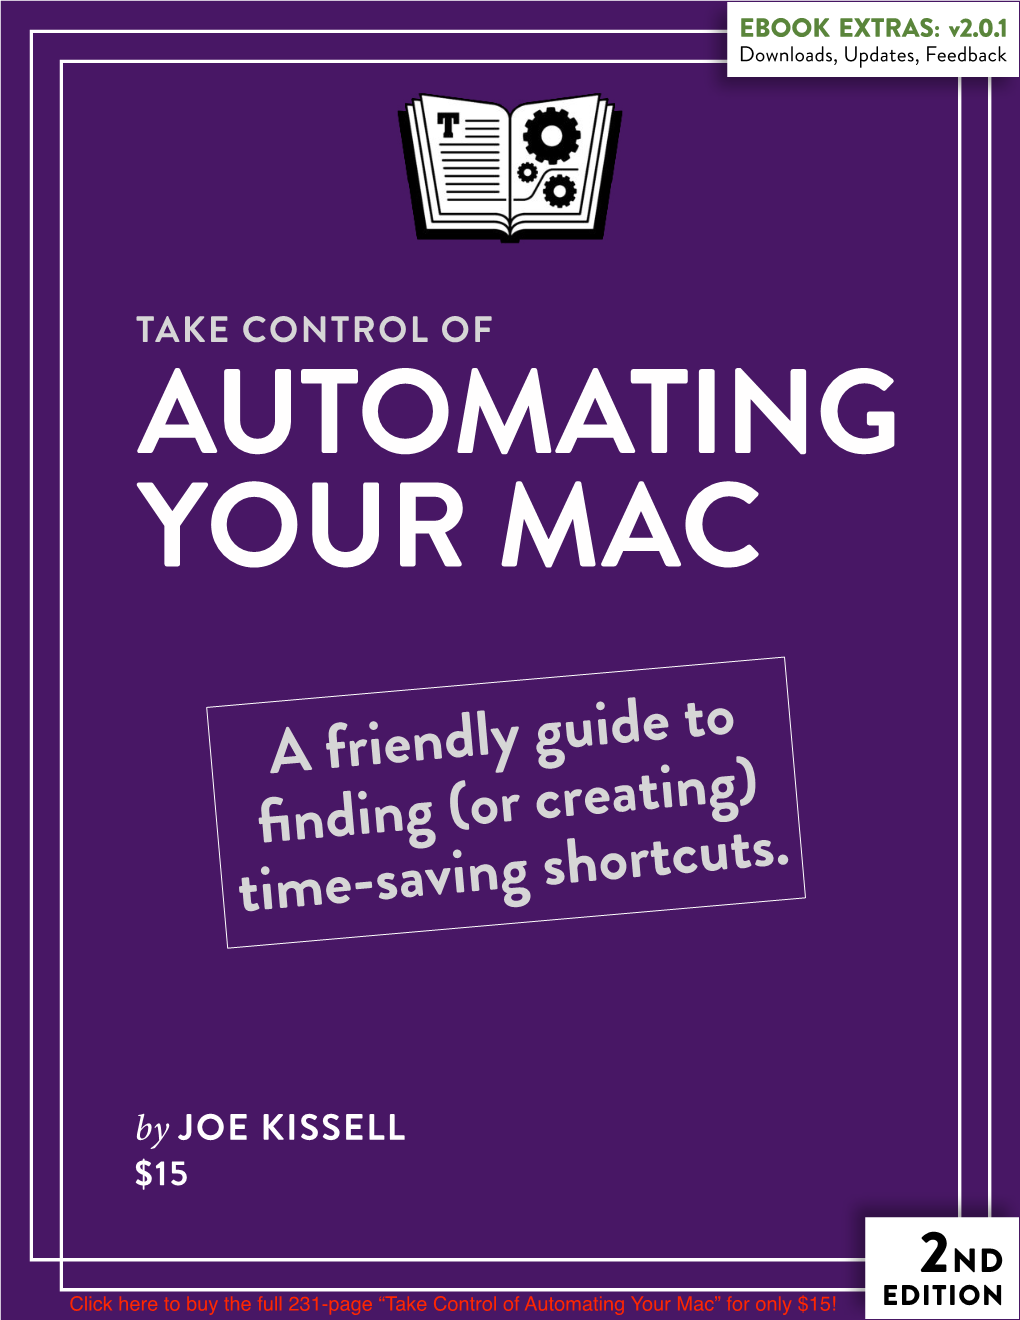 Take Control of Automating Your Mac (2.0.1) SAMPLE